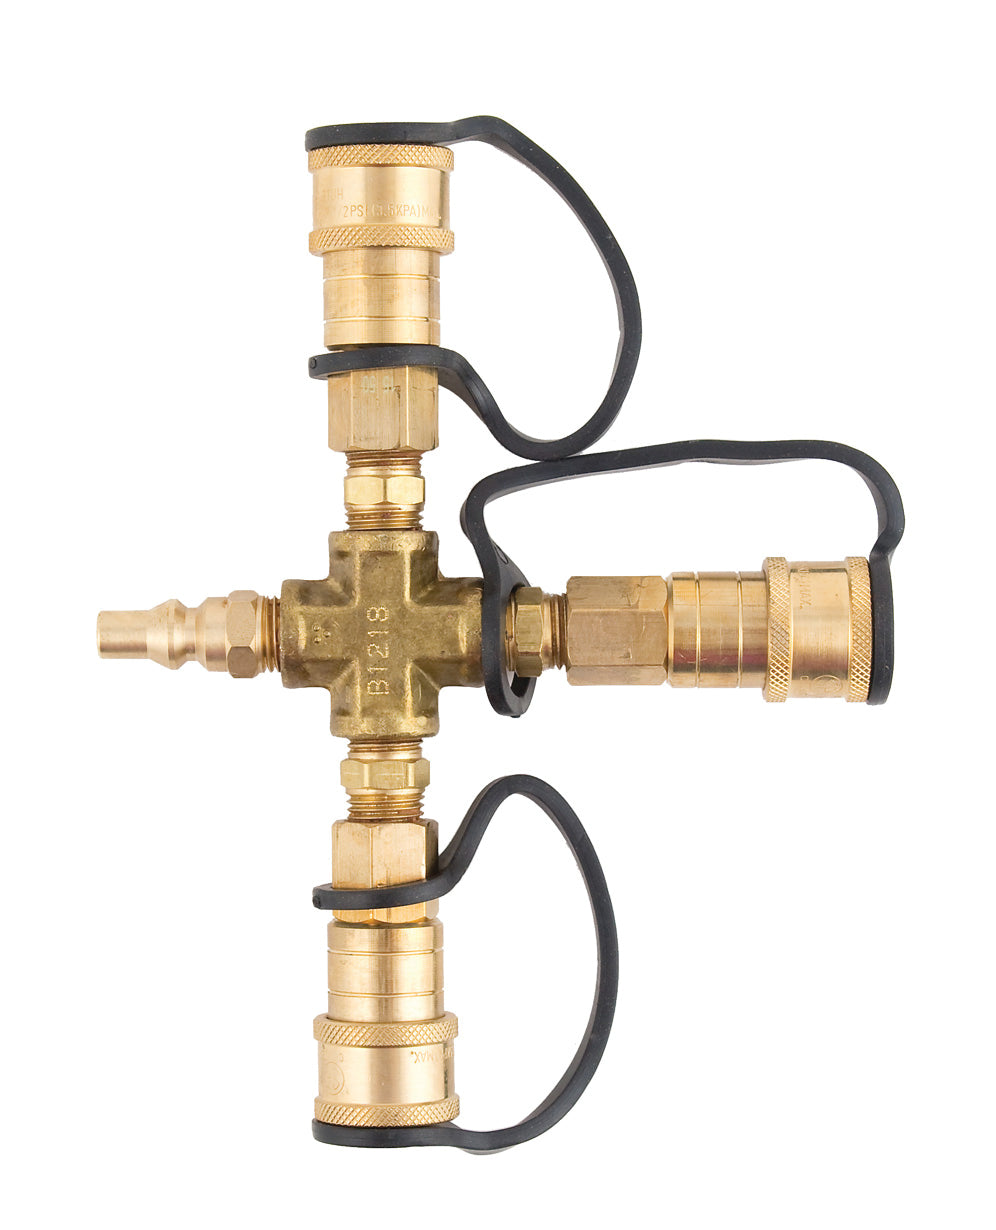 Marshall Excelsior ME24TP Propane Cross Adapter - 1/4 in. Male QD